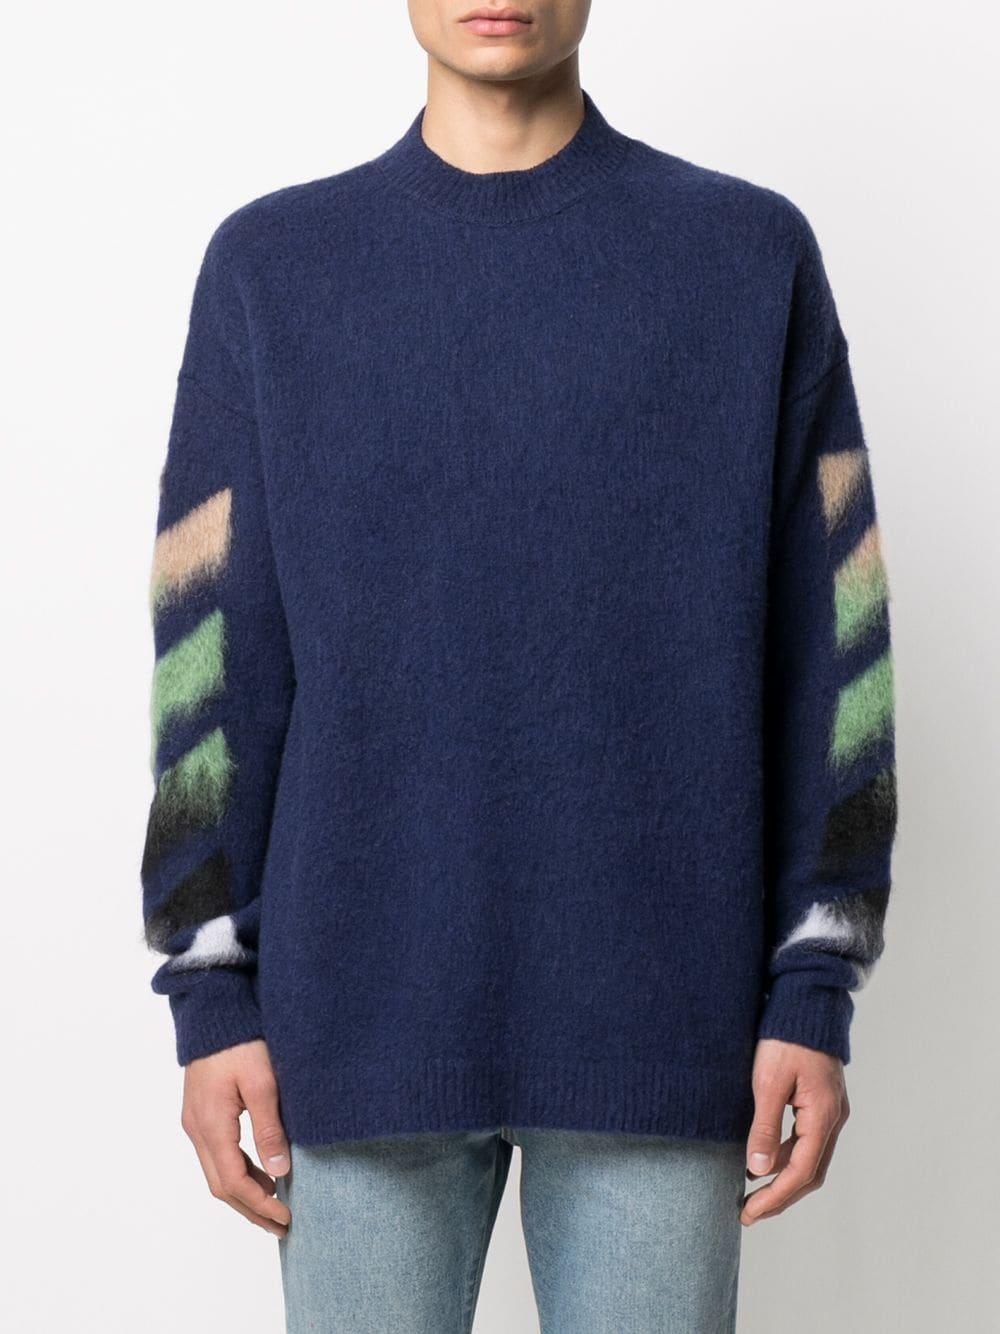 Off-White c/o Virgil Abloh Wool Patterned Intarsia-knit Jumper in Blue ...